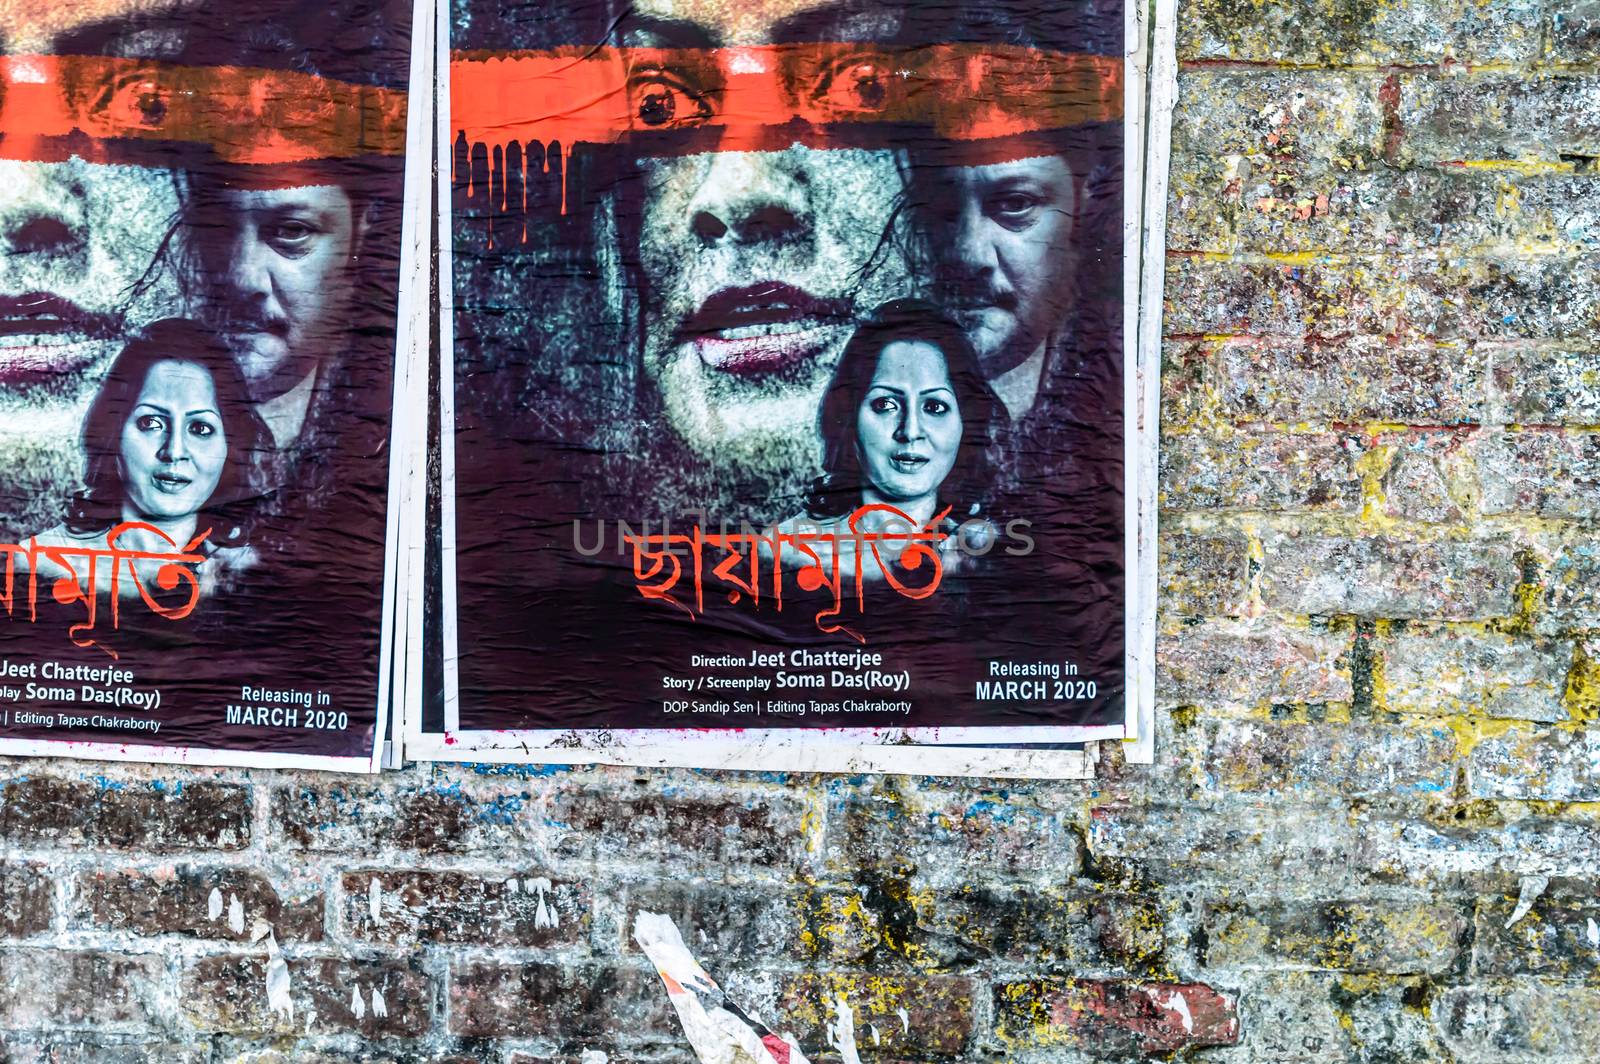 Bengali Tollywood Indian movie posters on an old brick wall of city street. Tollygunge Kolkata West Bengal India South Asia Pacific March 2020 by sudiptabhowmick